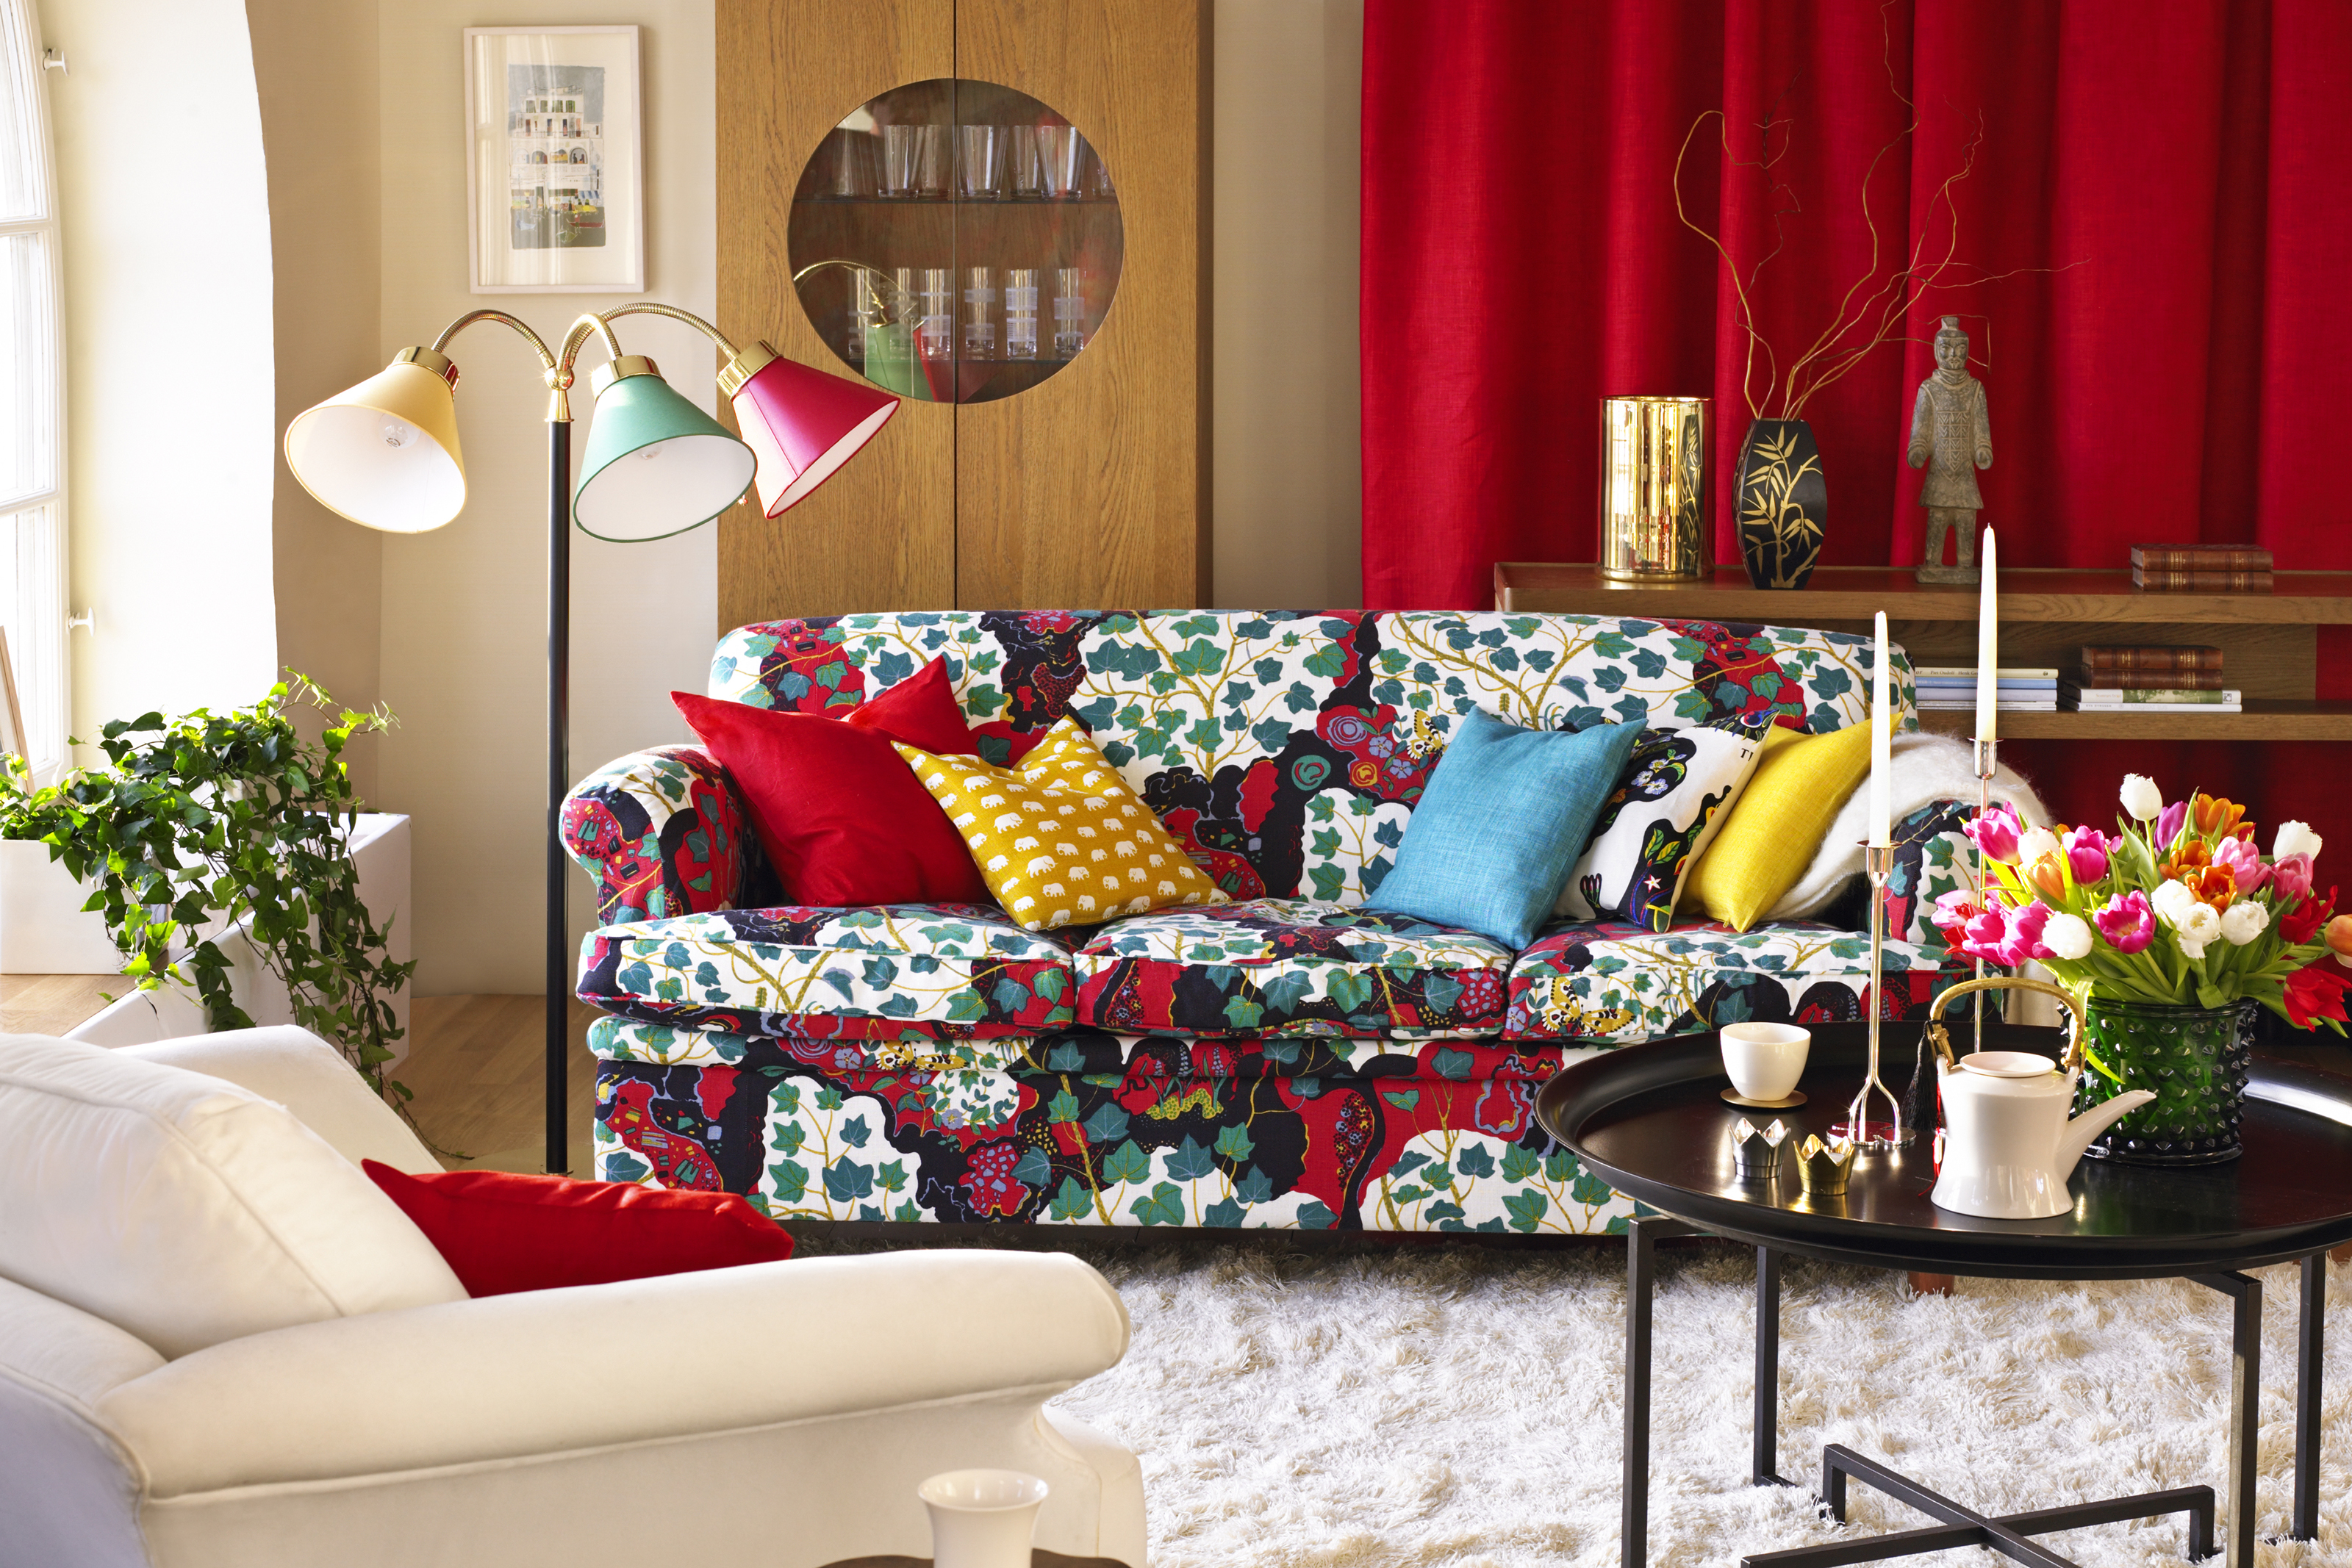 A colorful eclectic living room filled with personal touches.